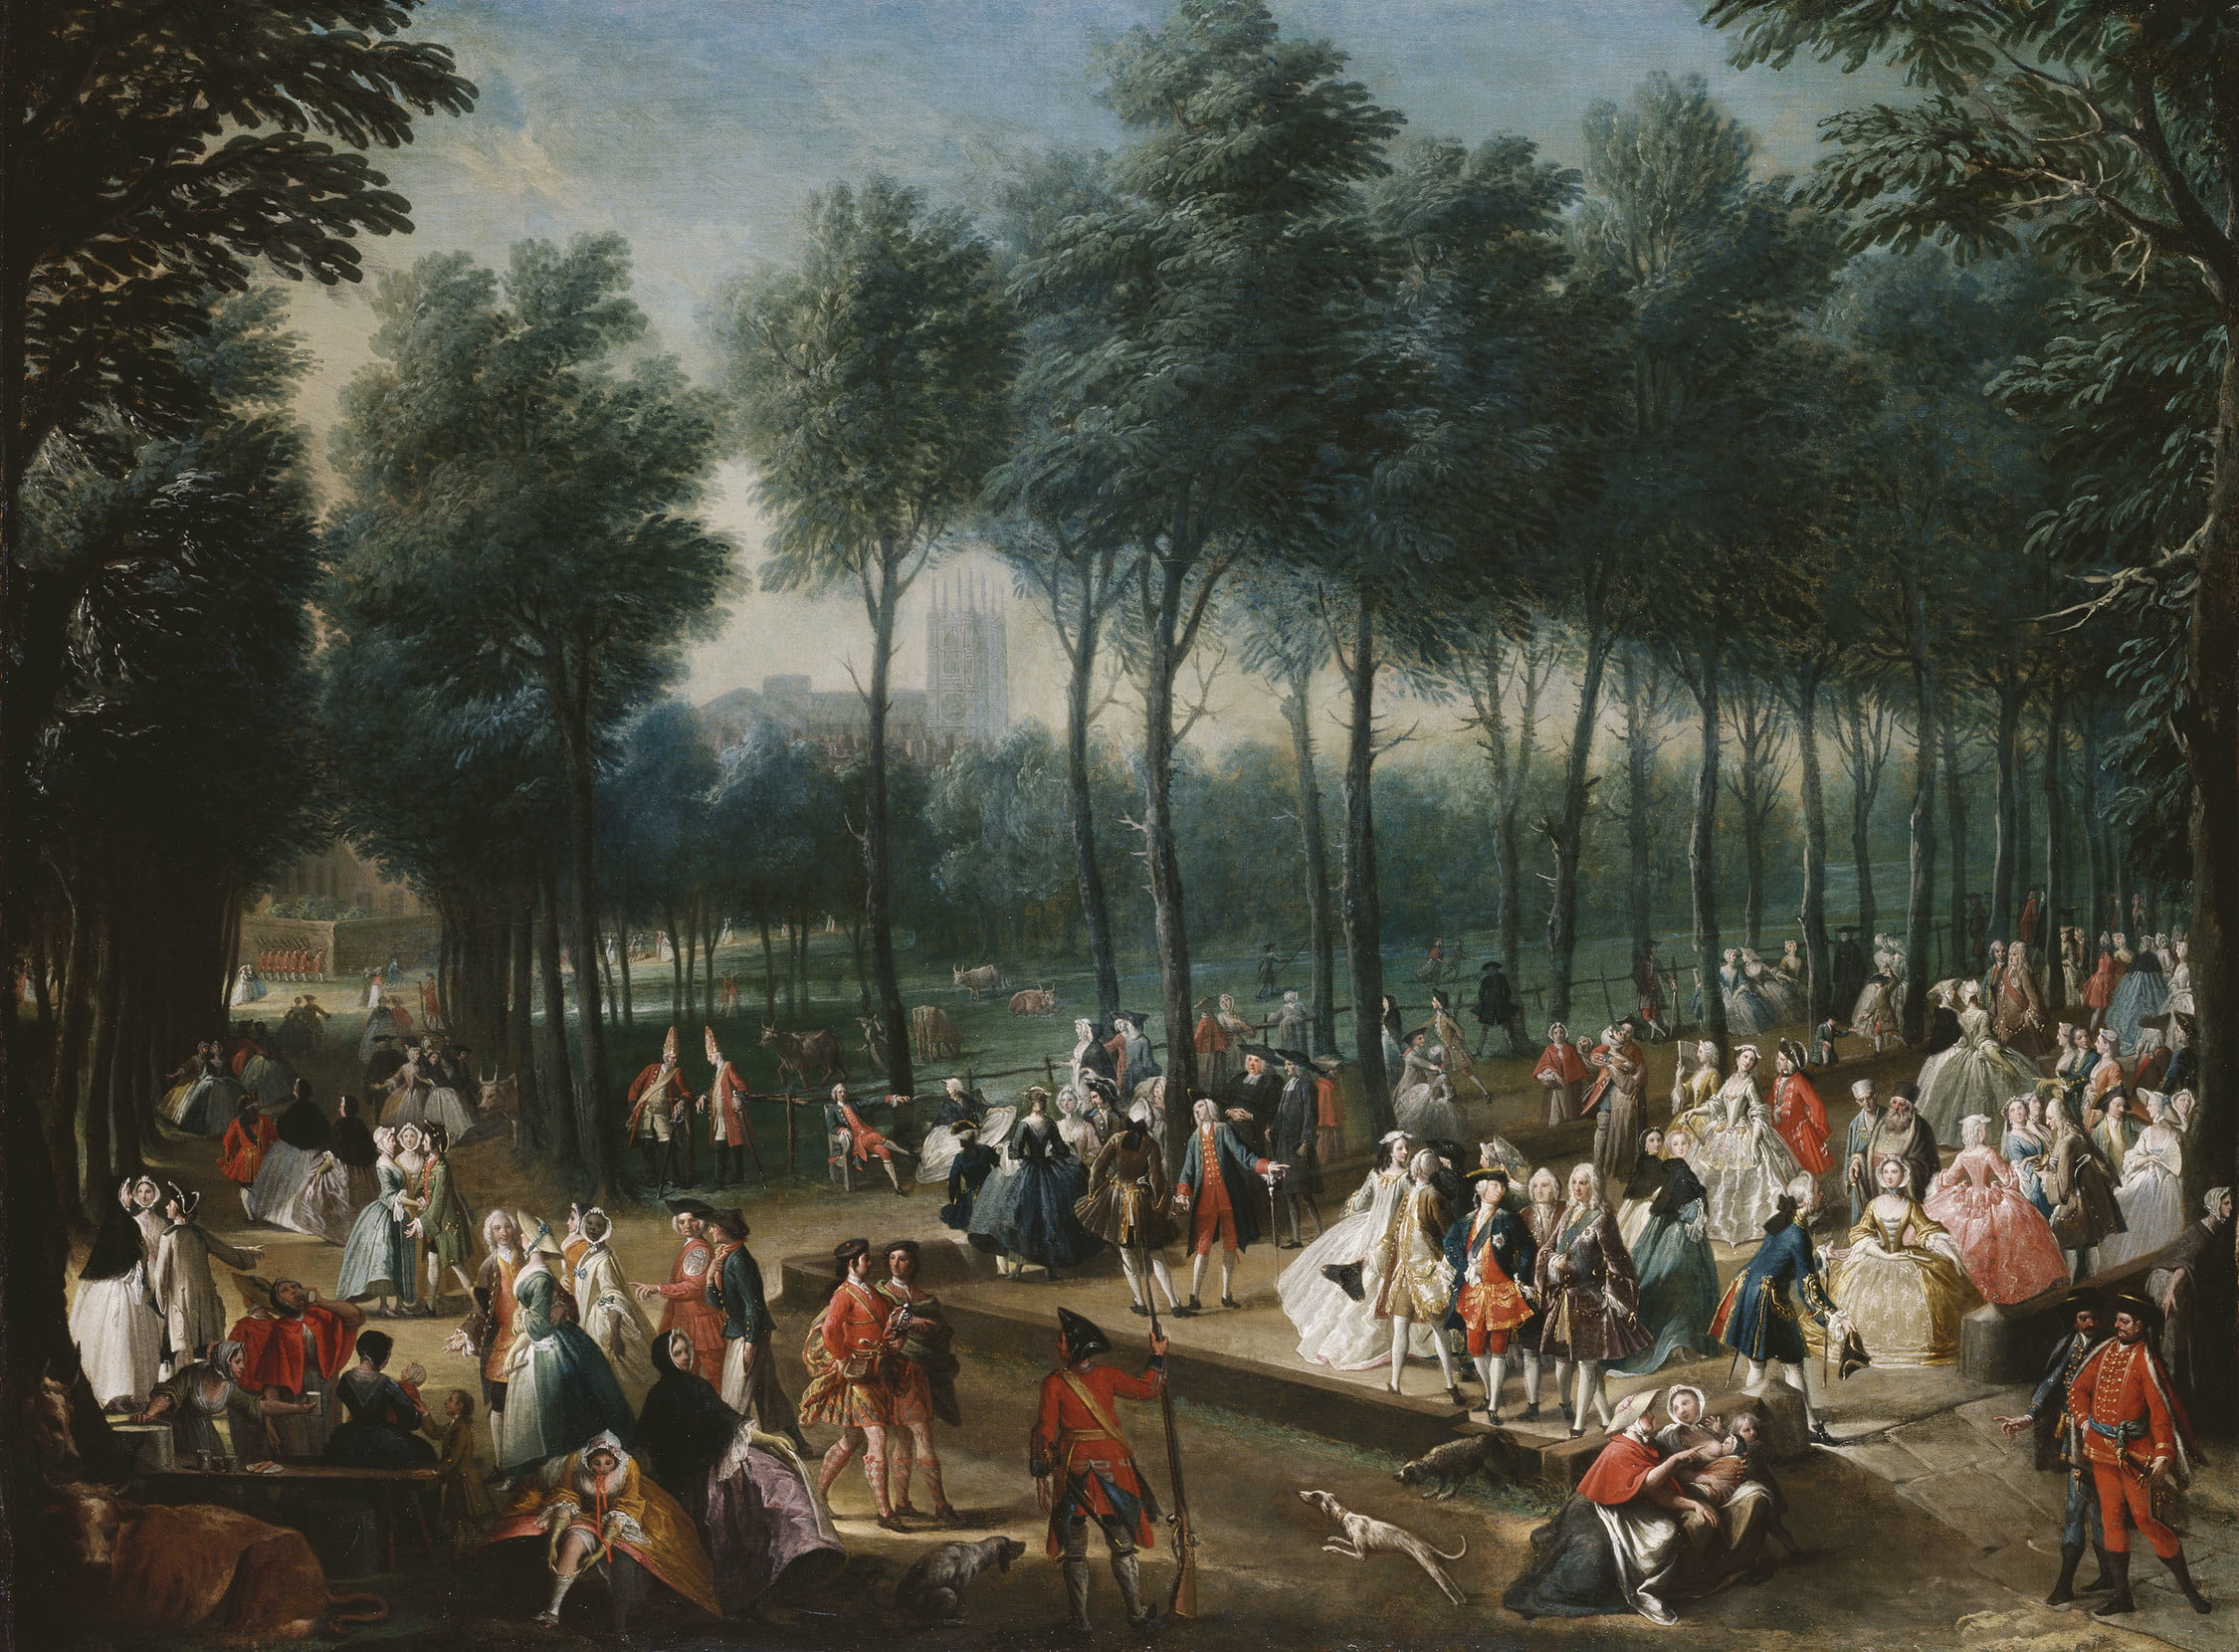 Painting of lots of people socialising outdoors in a palace garden, dressed as in the regency era.